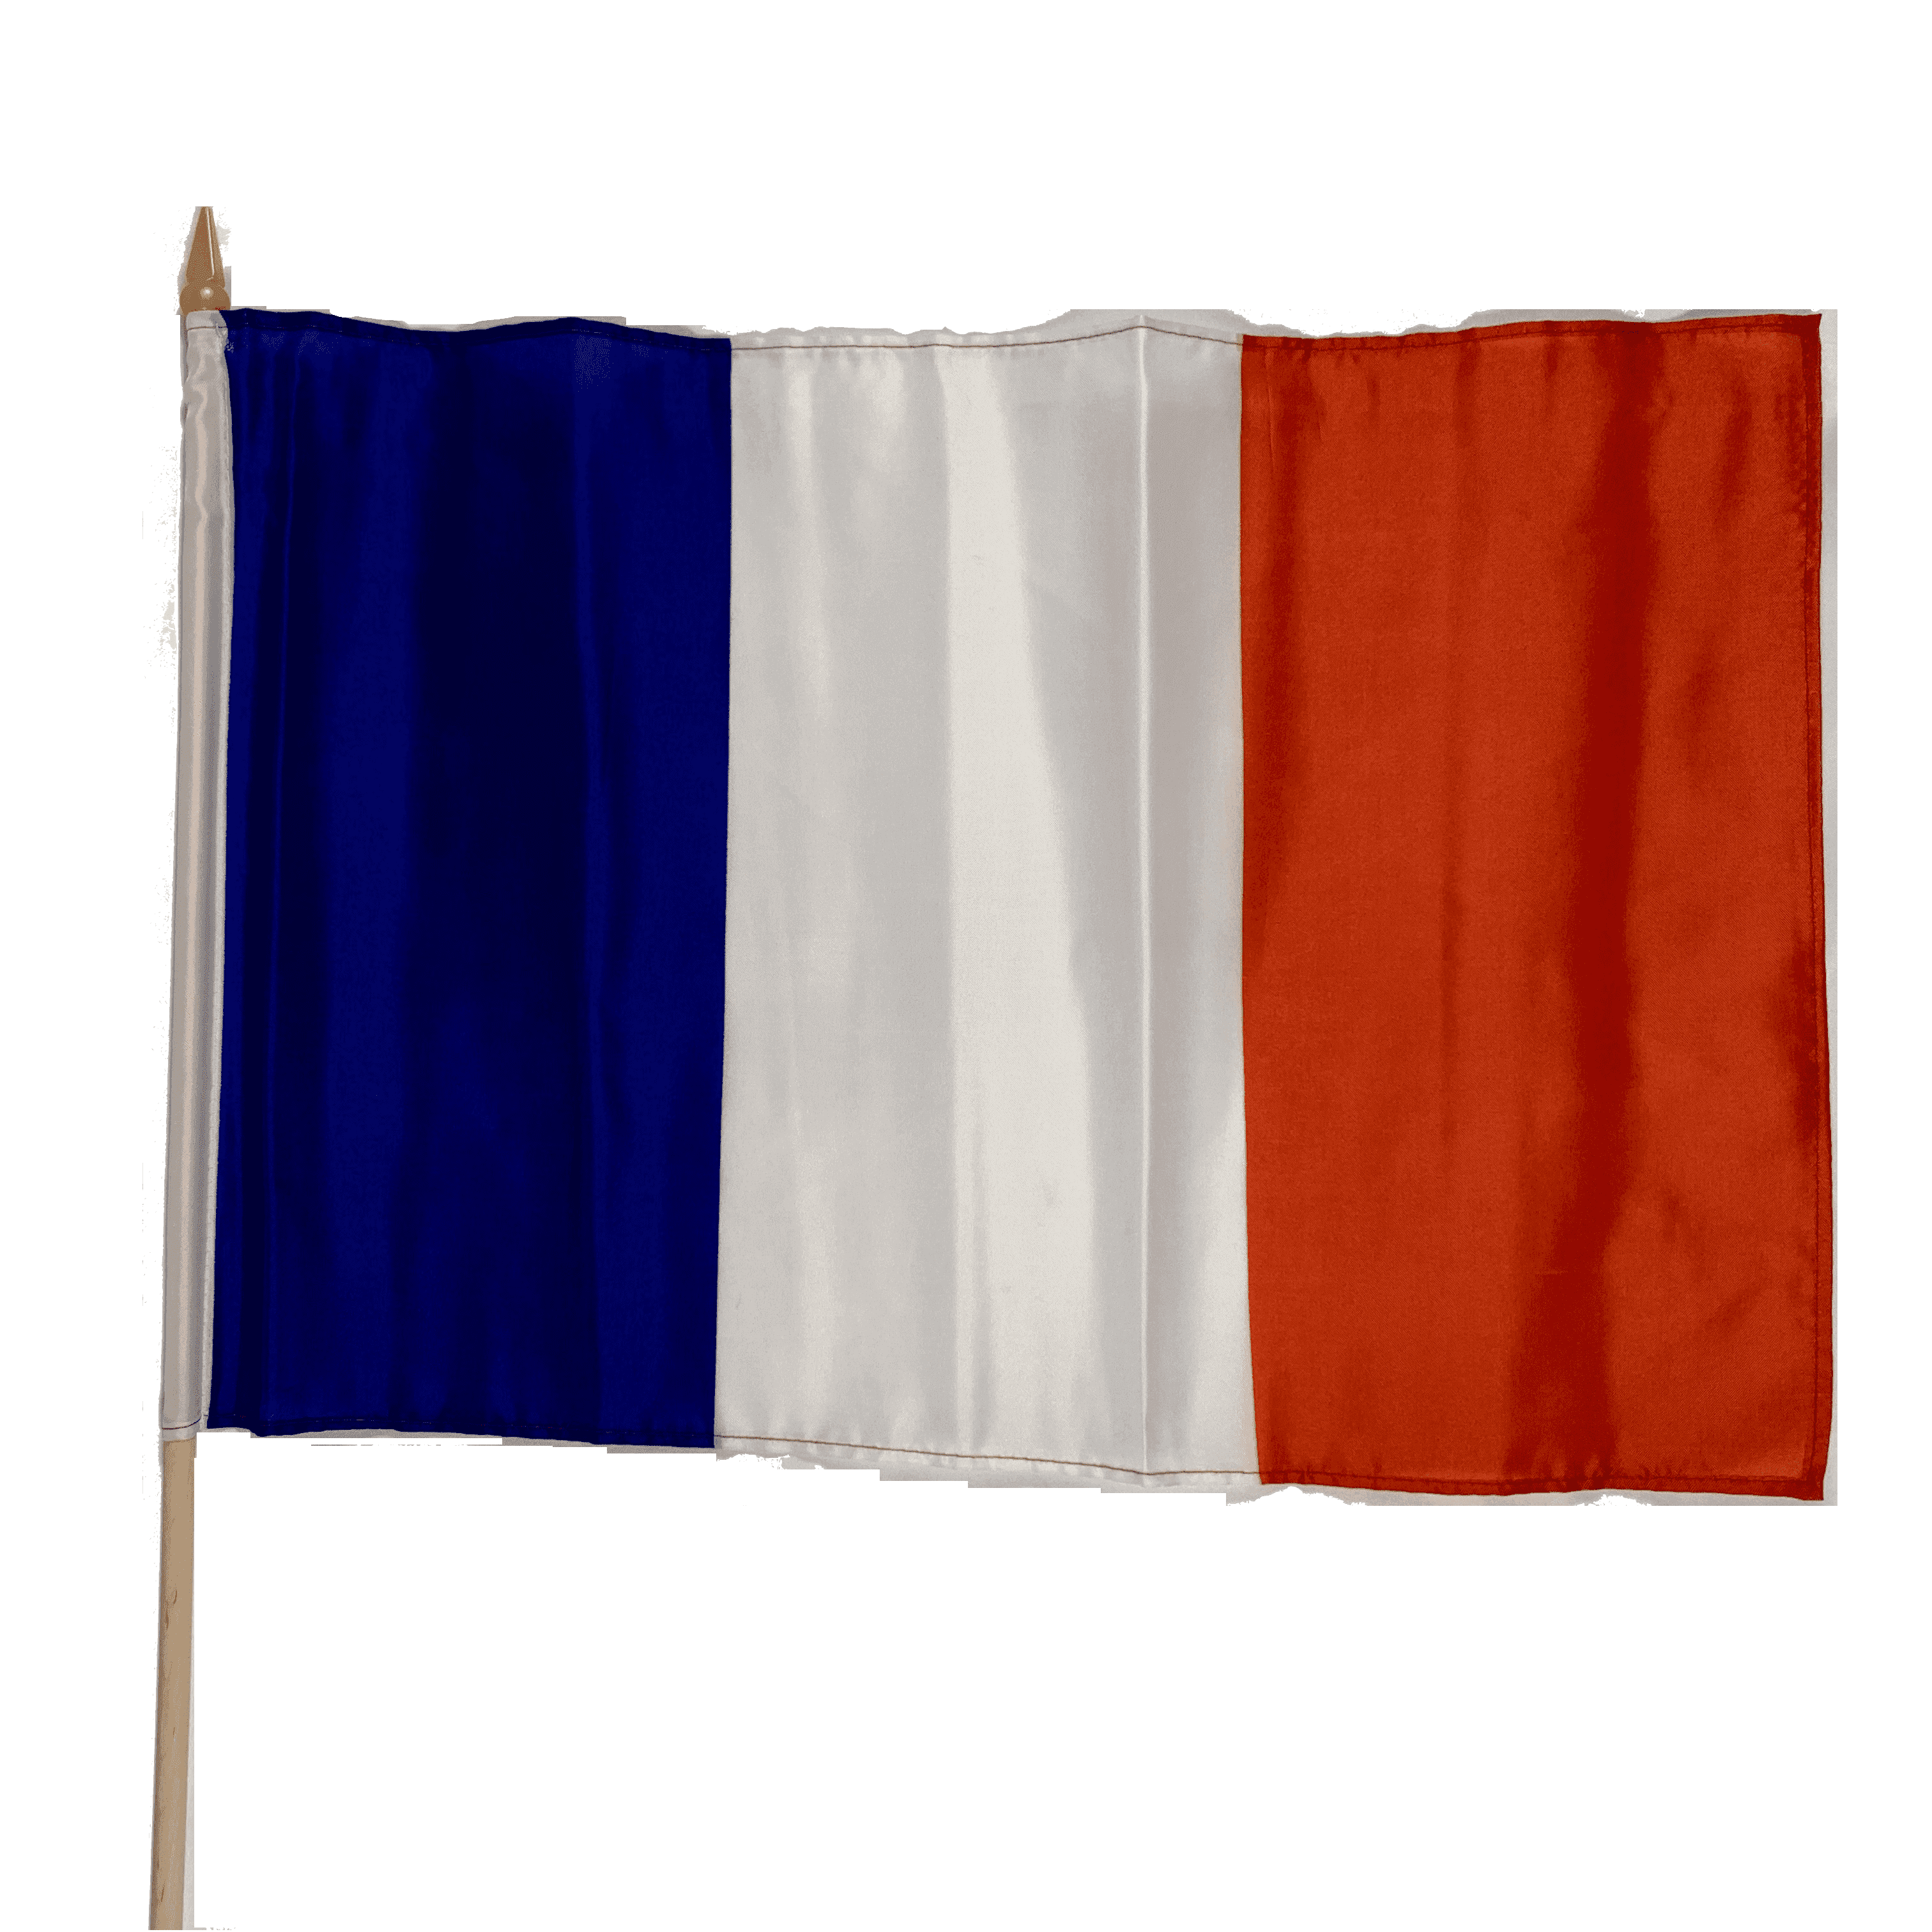 AZ FLAG Provence-Alpes-Côte d'Azur Flag 18'' x 12'' Cords French Region of PACA Small Flags 30 x 45cm Banner 18x12 in